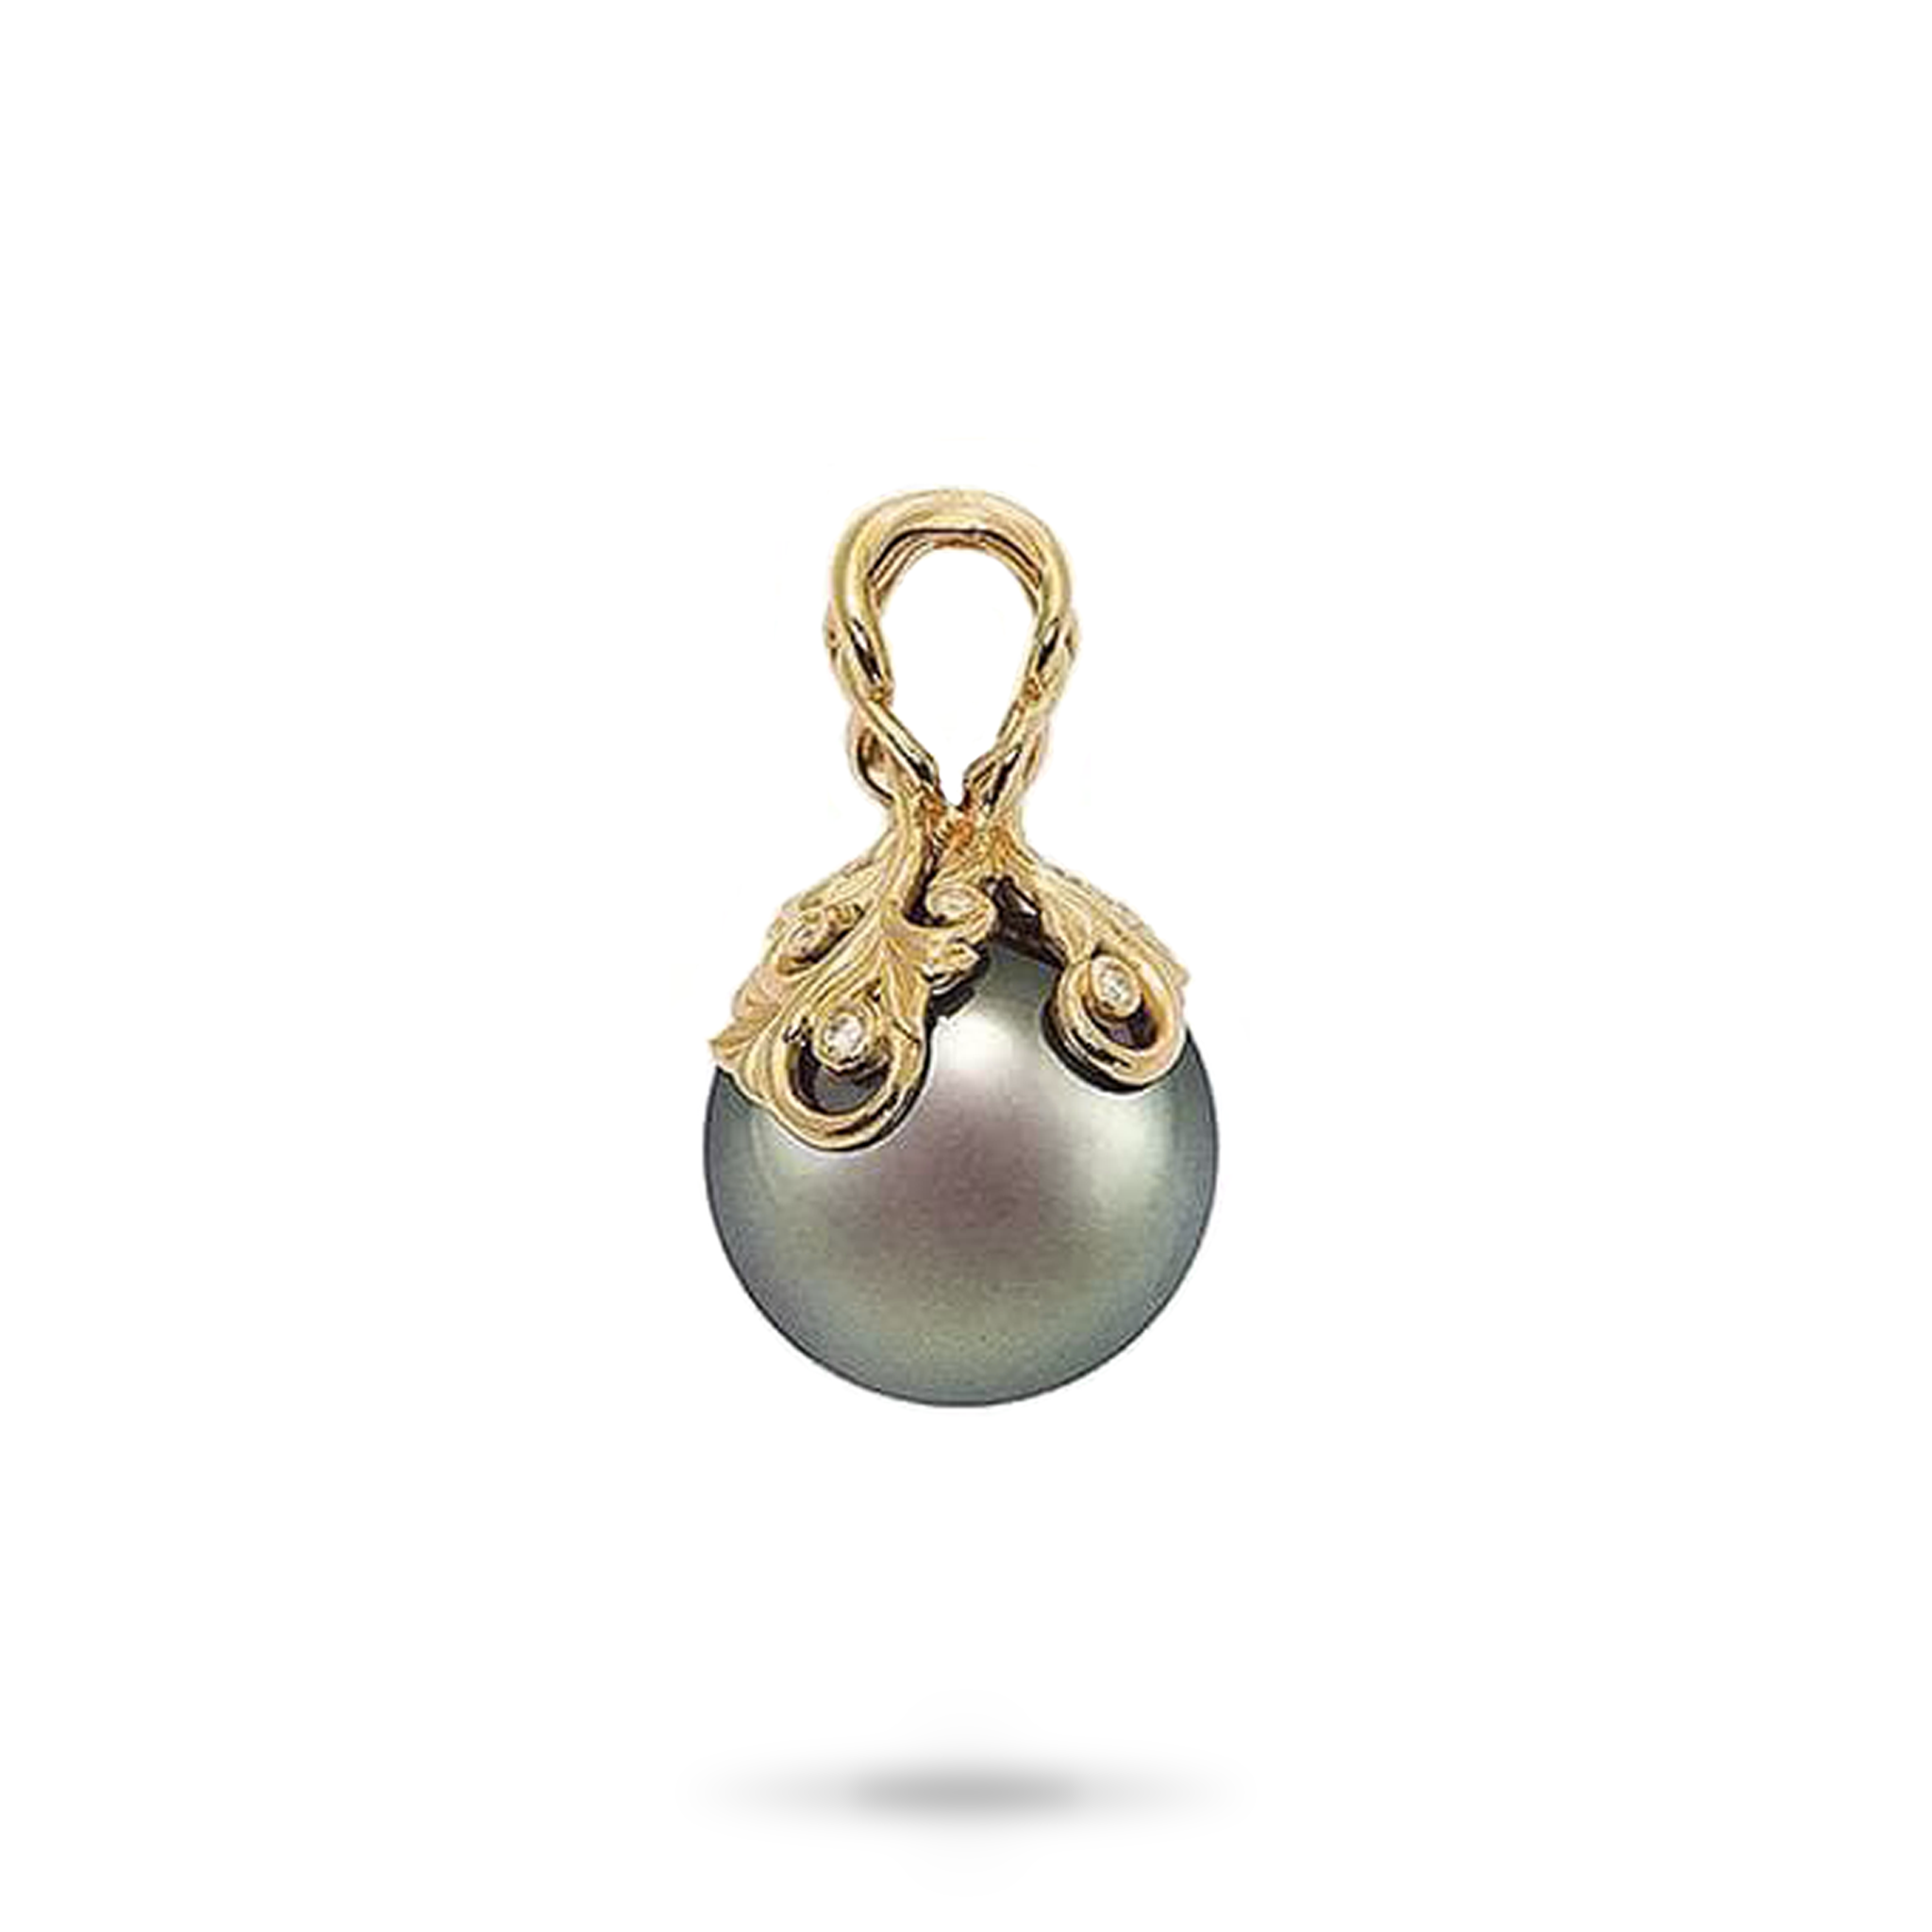 Living Heirloom Tahitian Black Pearl Pendant in Gold with Diamonds - 14-15mm